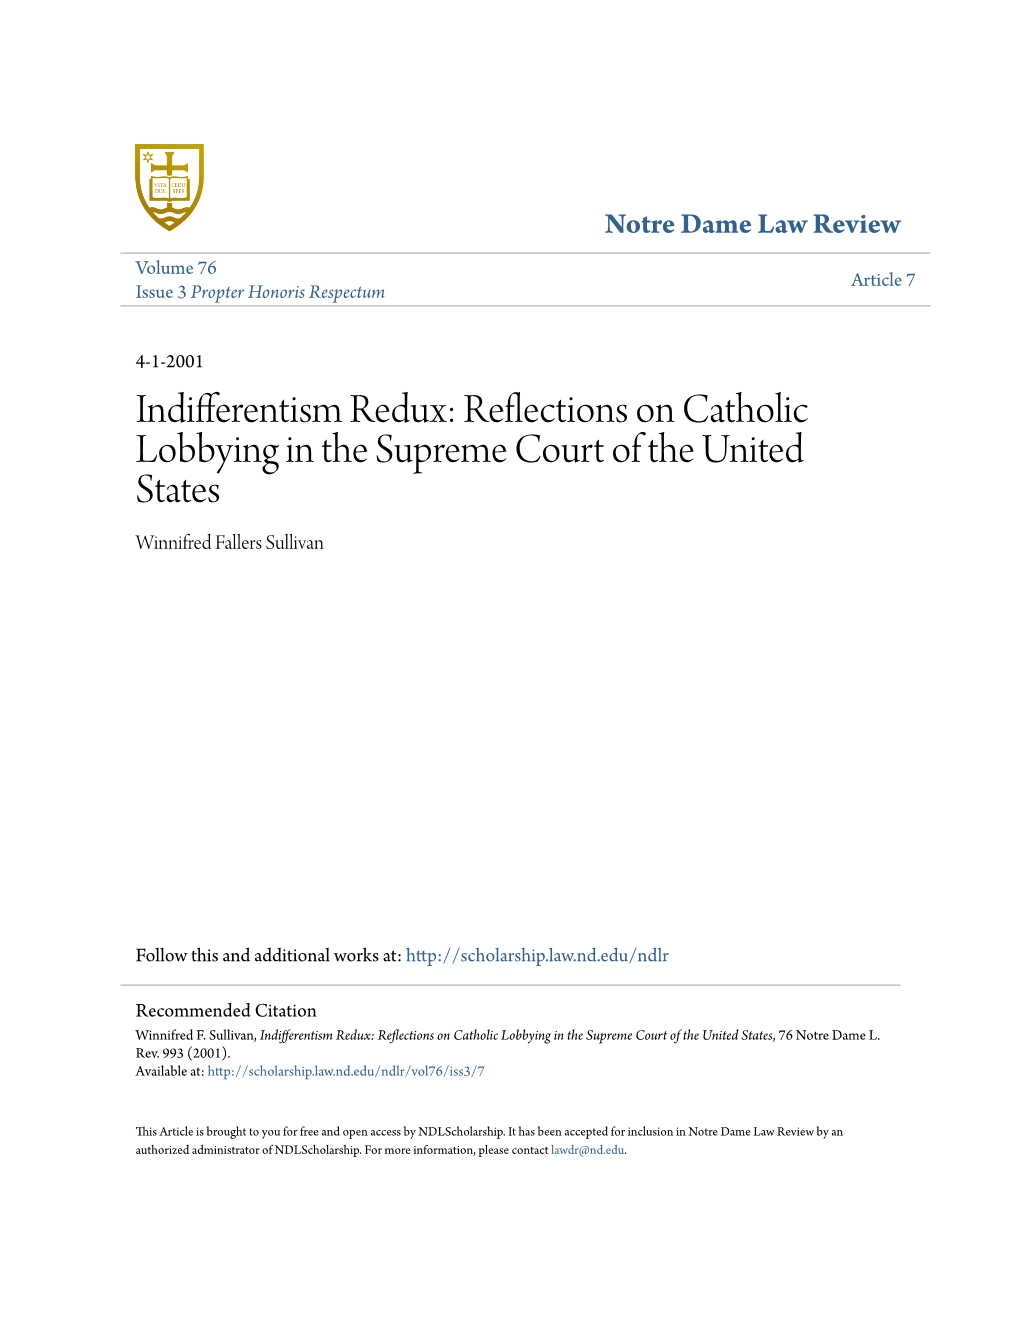 Indifferentism Redux: Reflections on Catholic Lobbying in the Supreme Court of the United States Winnifred Fallers Sullivan